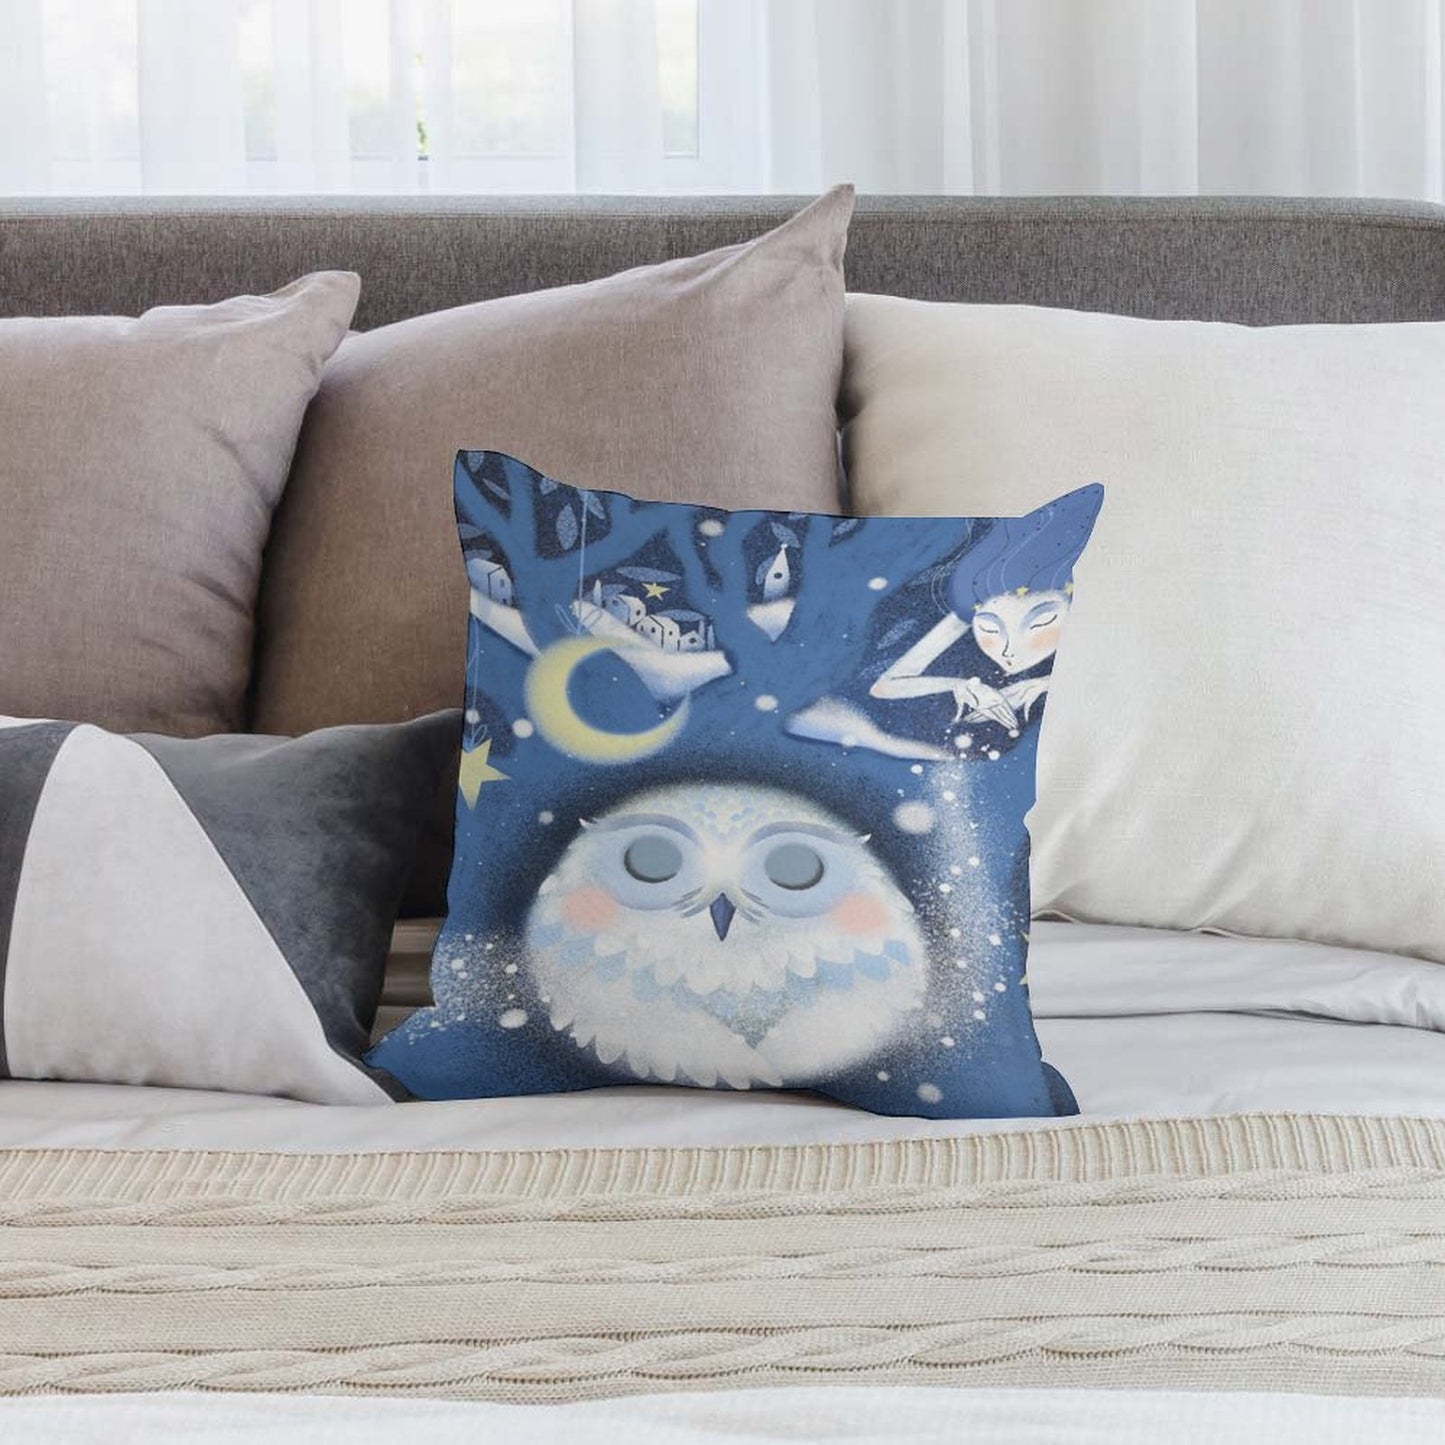 Online DIY Plush Pillow Cover 18"×18" Double-sided Printing Only Pillowcase